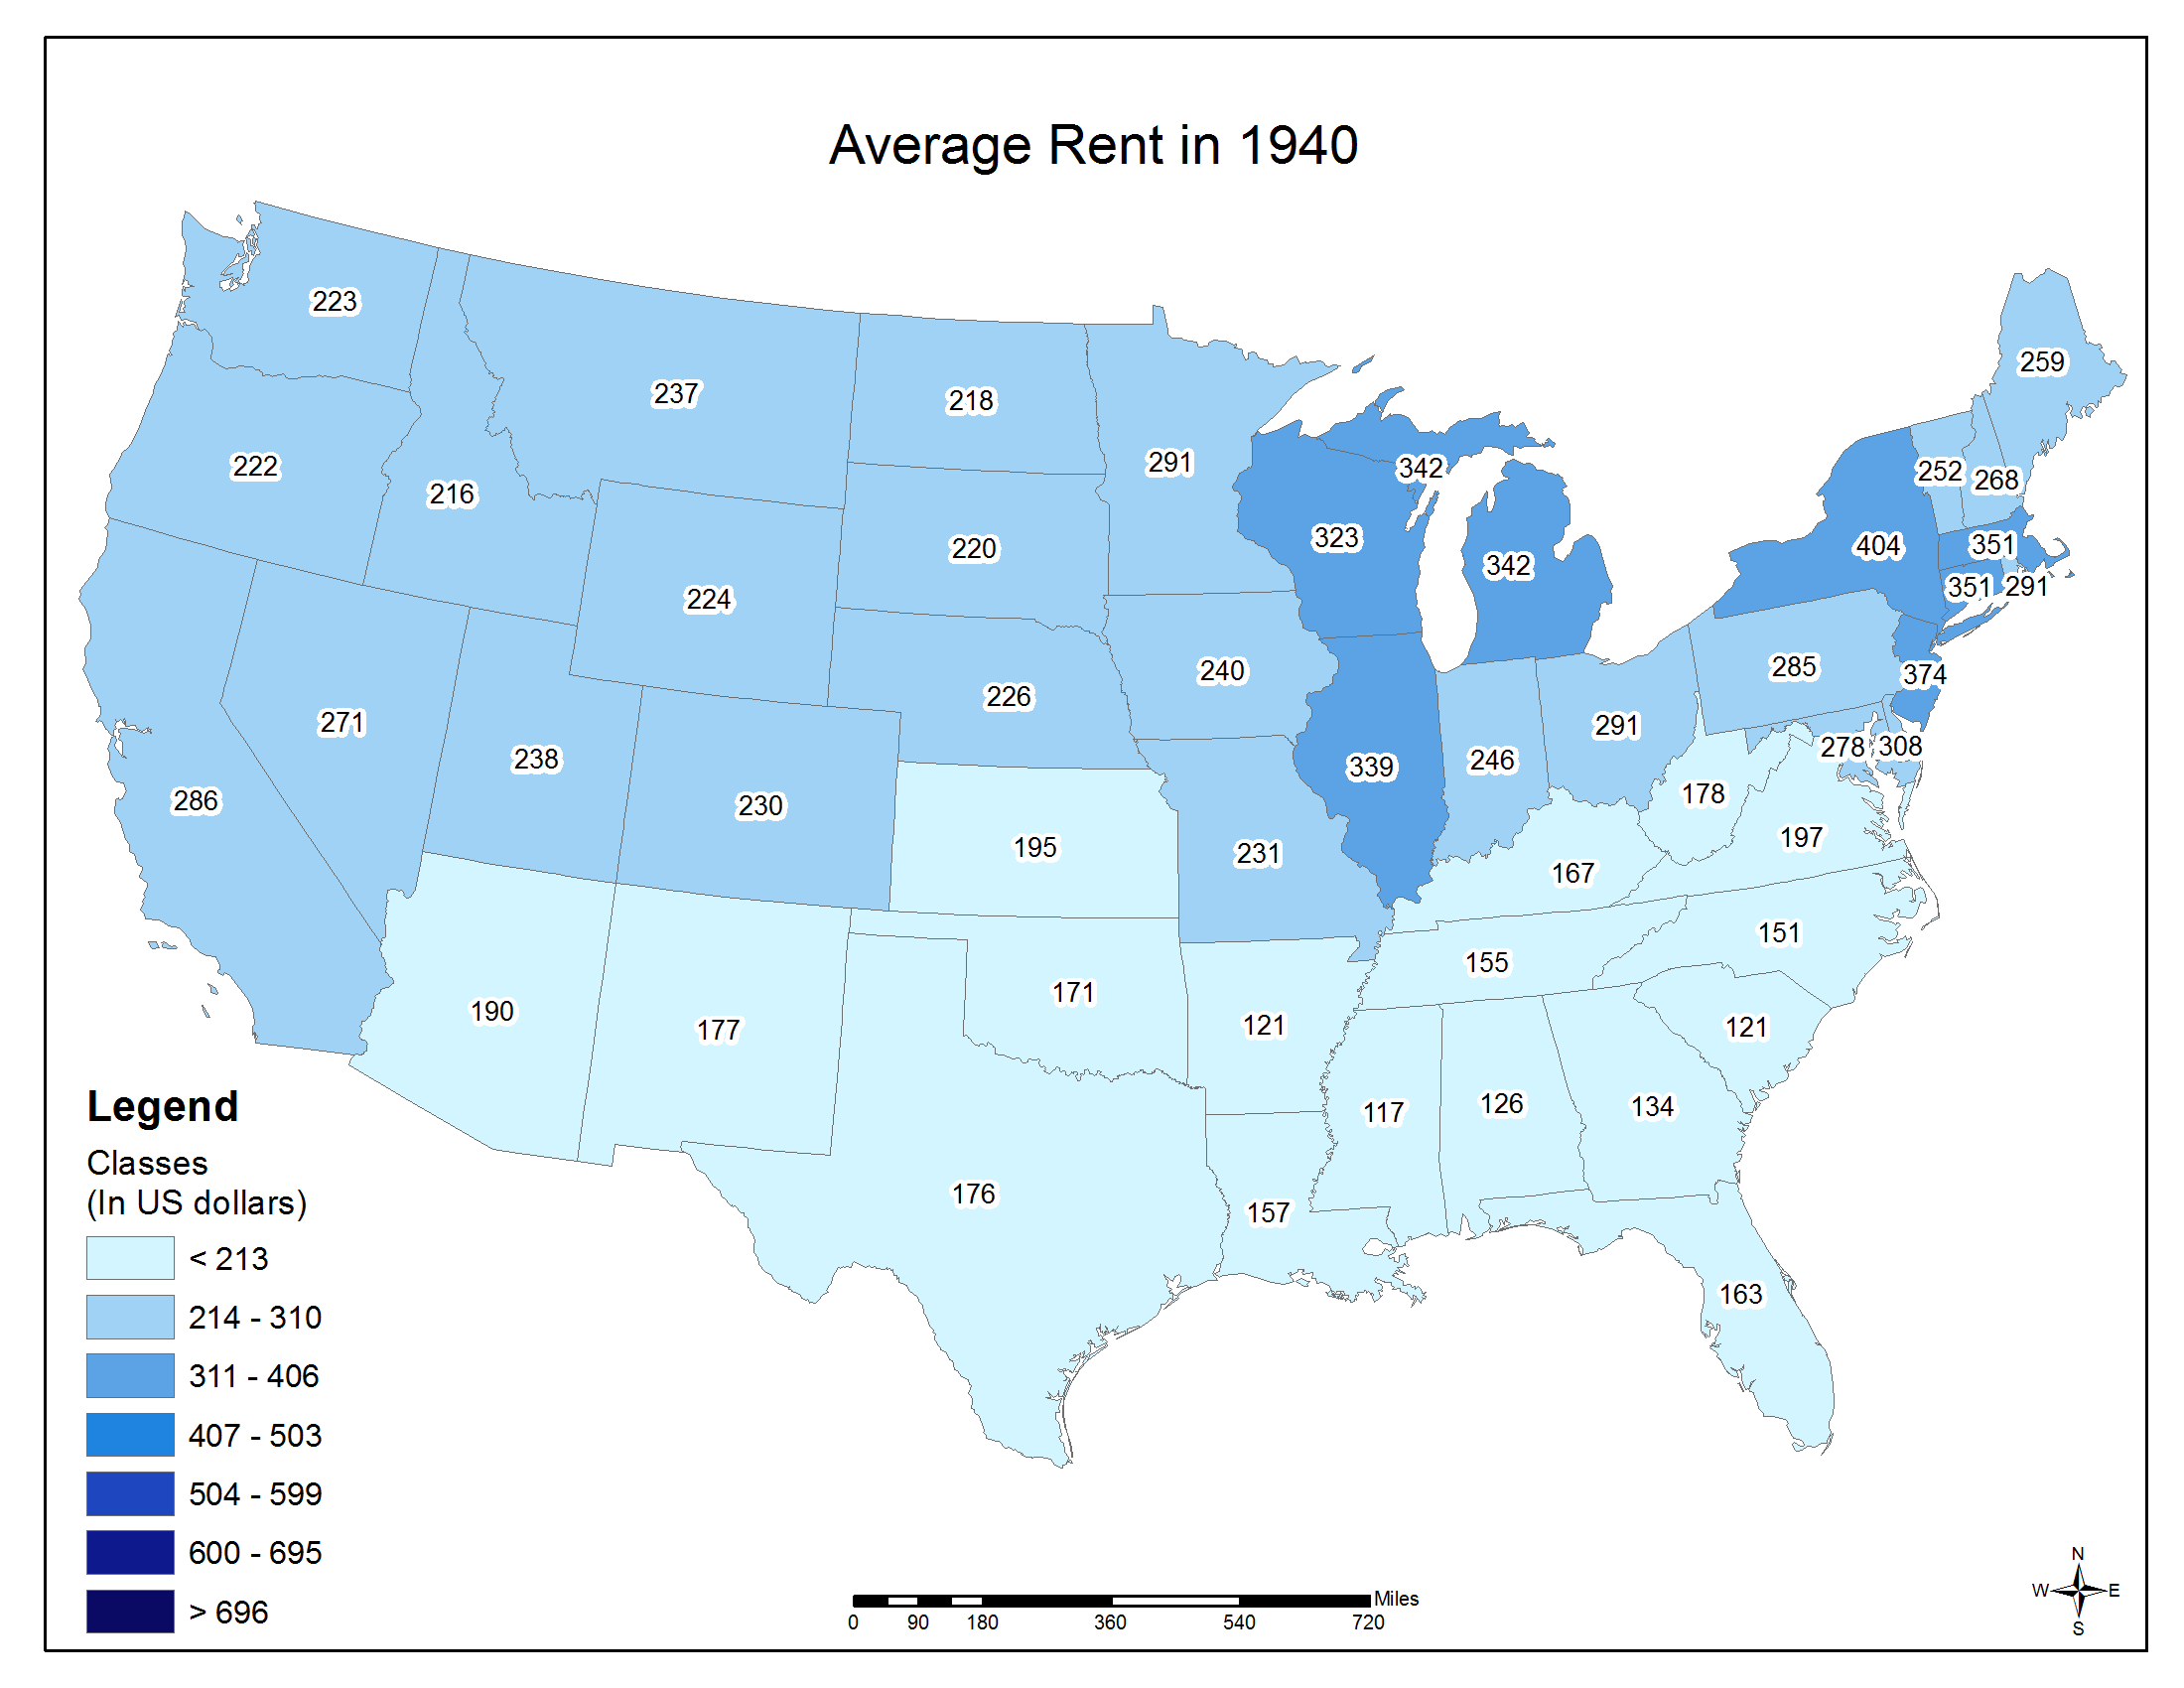 Rent and Housing Values in the United States, 1940-2000 [OC] [GIF] [2200x1700]